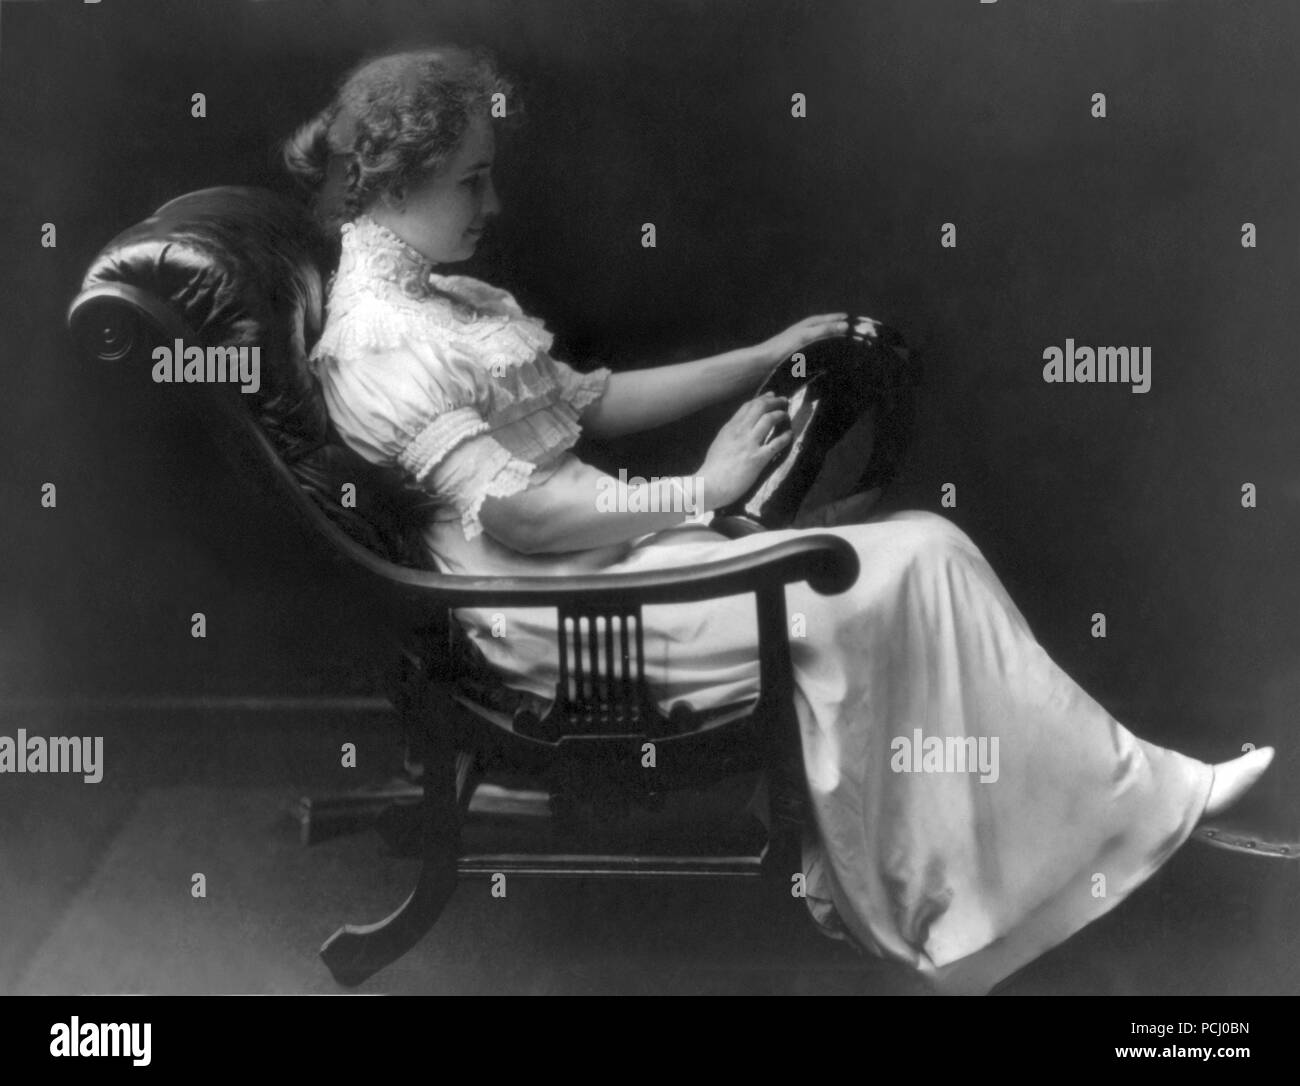 Helen Keller, full-length portrait sitting in a lounge chair holding a vase in left hand and touching it with her right hand in 1909. Helen Keller (June 27, 1880 – June 1, 1968) was an American author, political activist, and lecturer. She was the first deaf-blind person to earn a bachelor of arts degree. Stock Photo